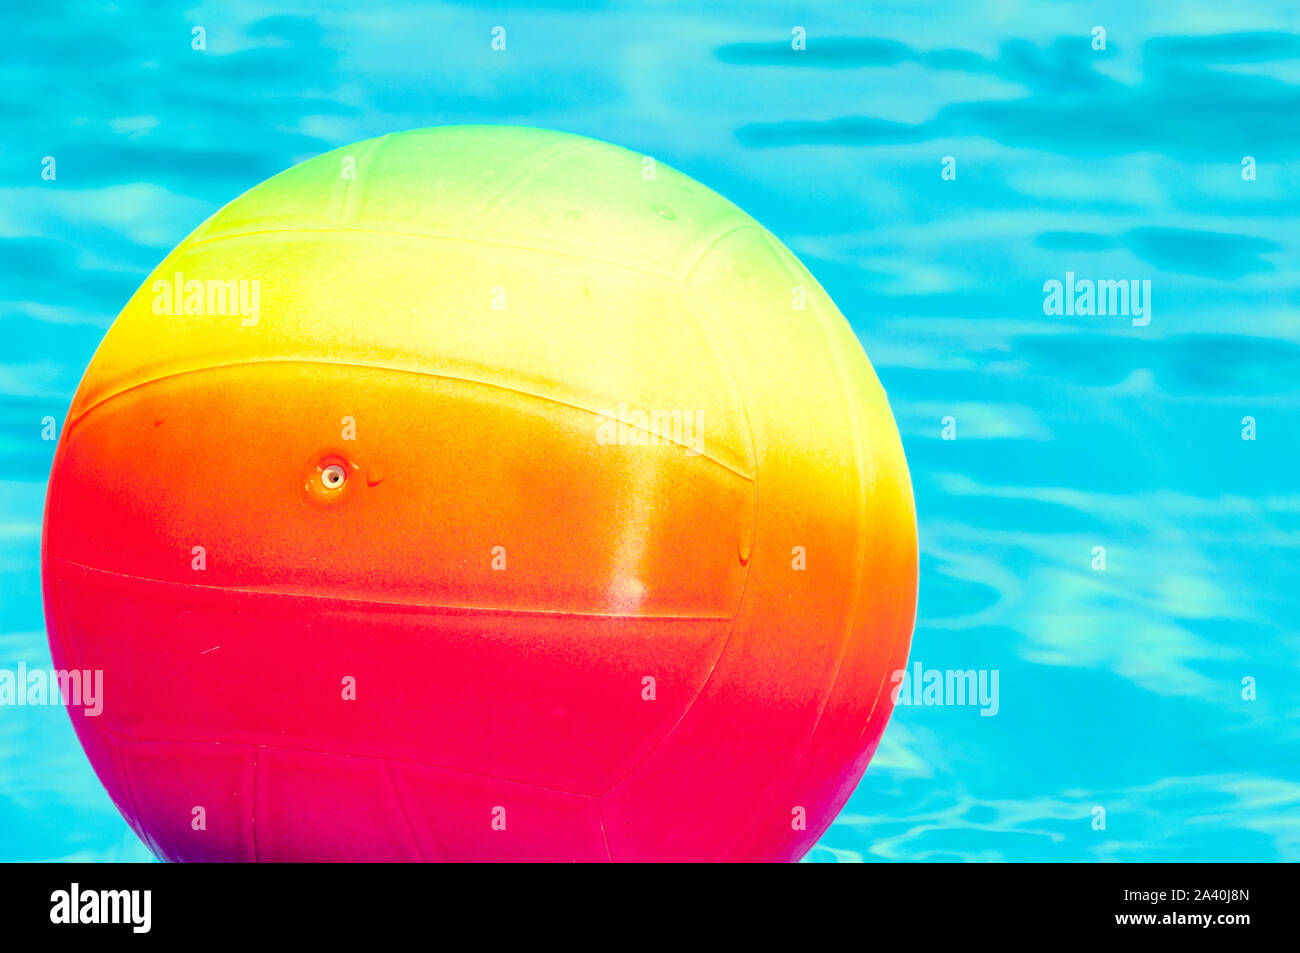 Bright rainbow ball in a swimming pool turquoise water. Concept of a joyful summer vacation. Idea of outdoor games in the summertime. Stock Photo